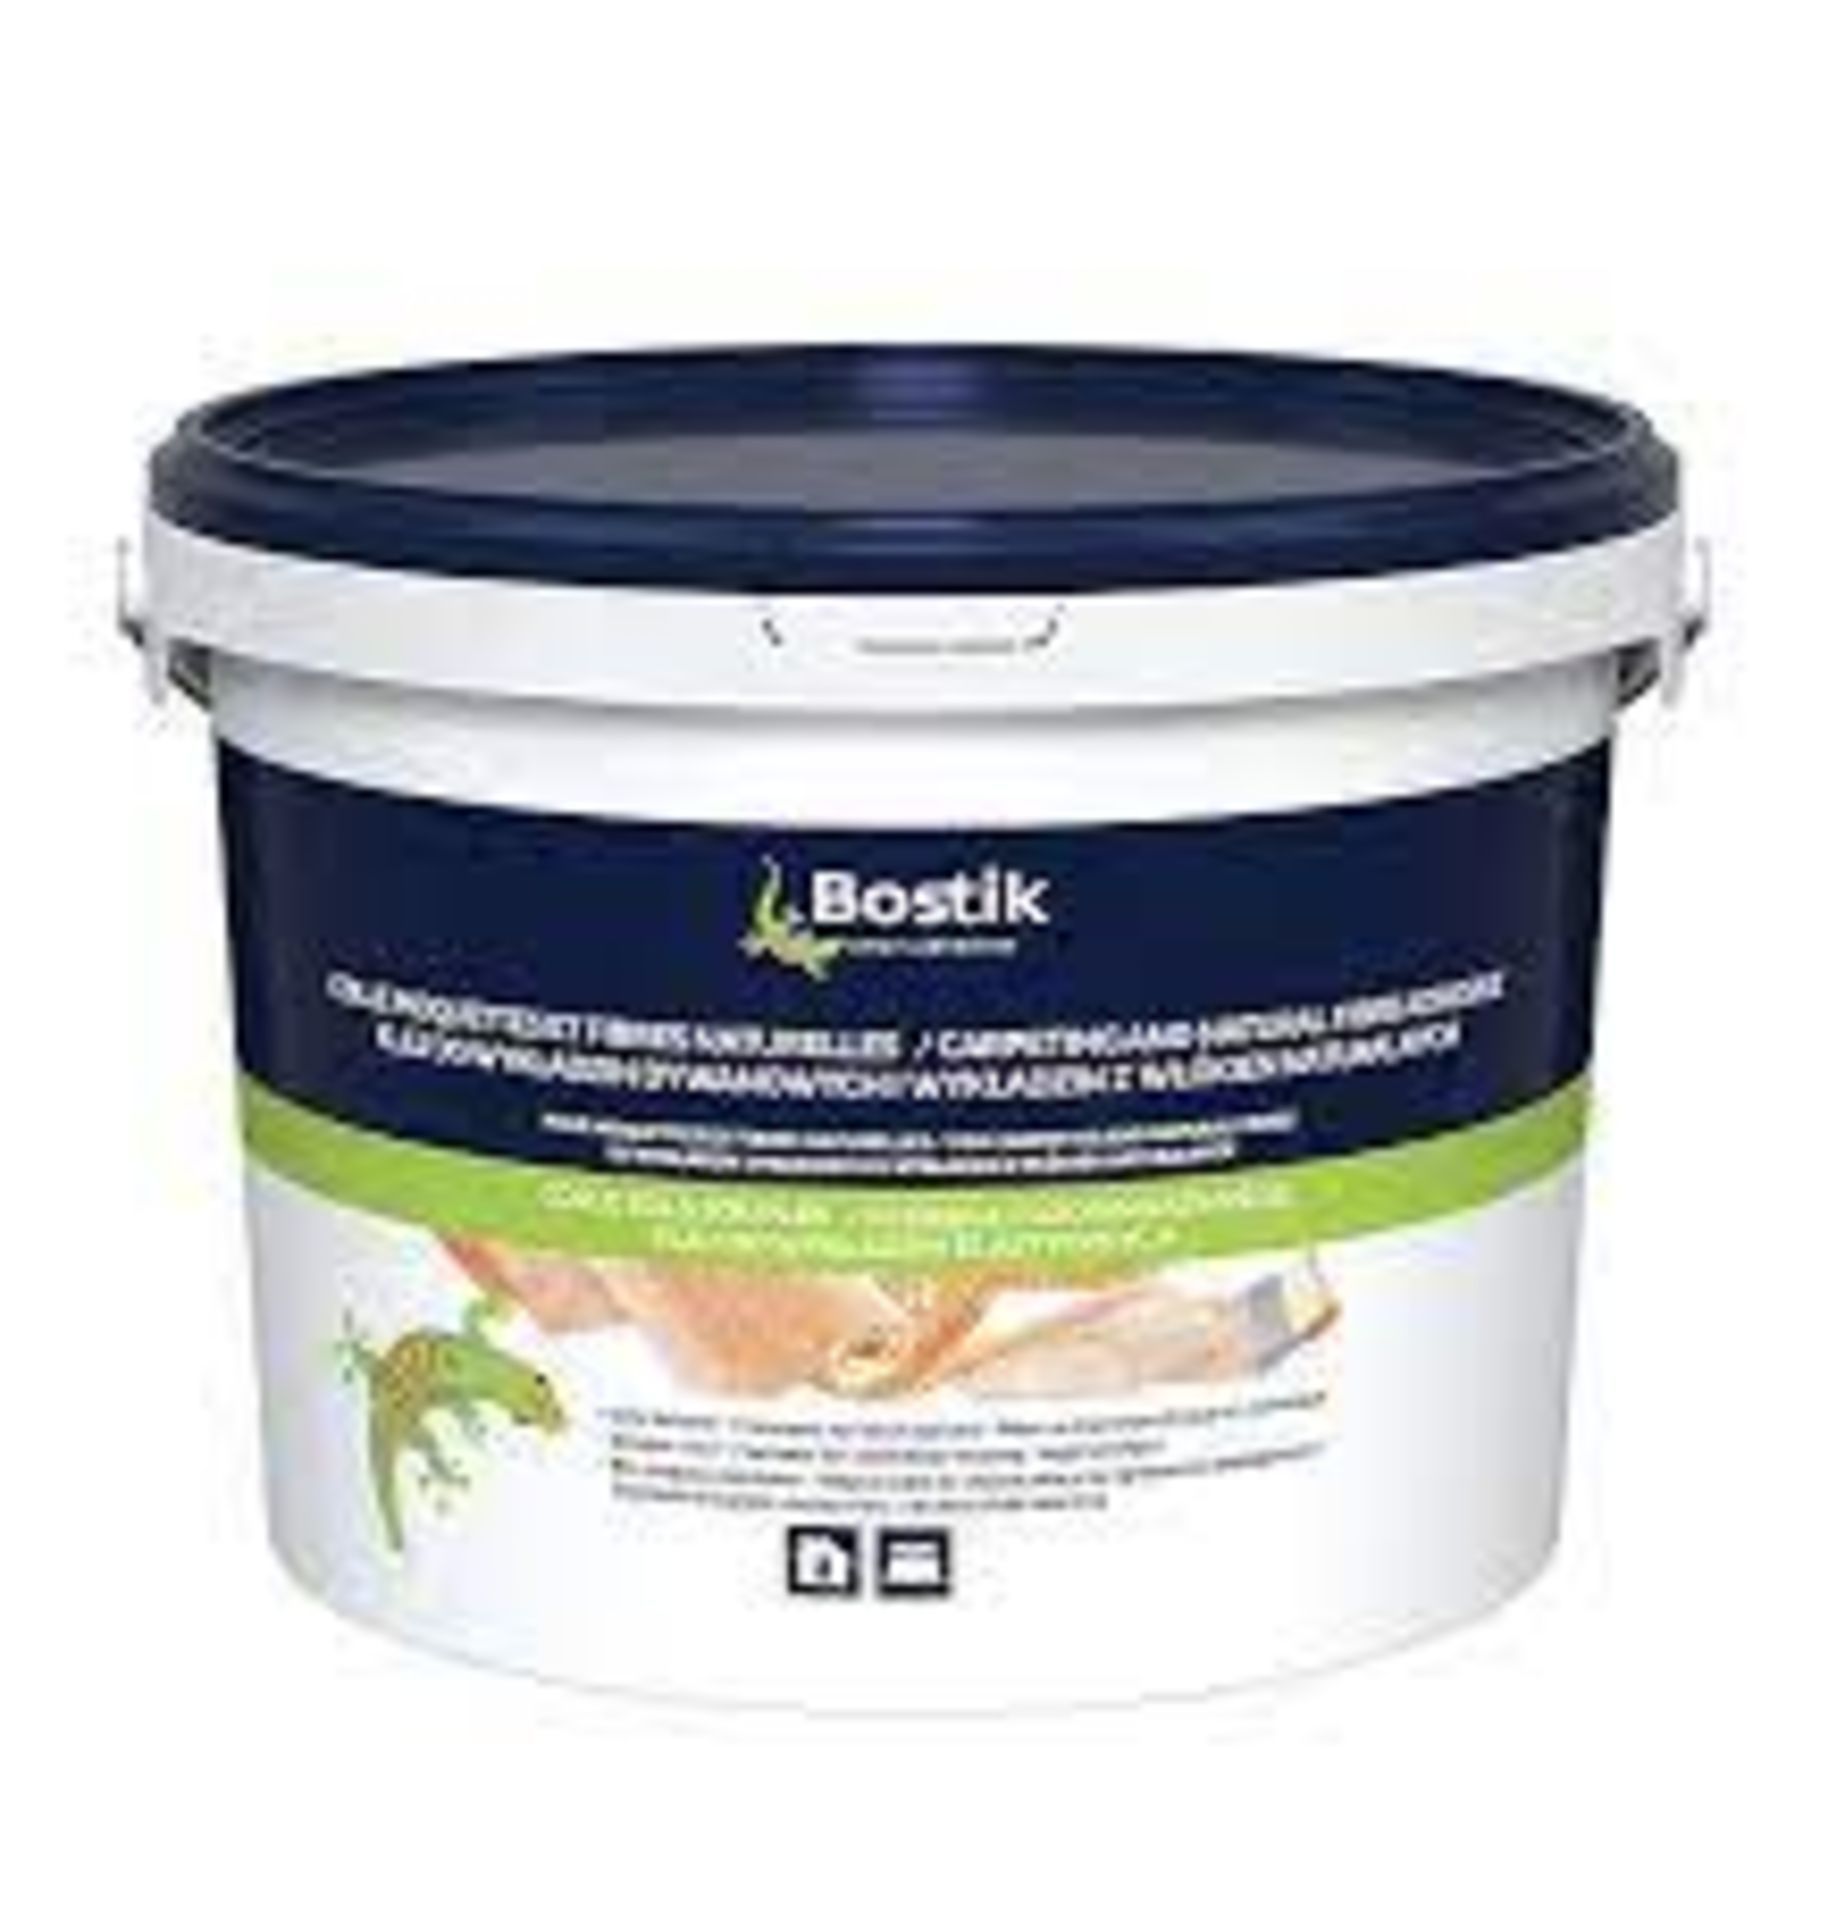 (A11) PALLET TO CONTAIN 30 X 12KG TUBS OF BOSTIK CARPETING AND NATURAL FIBRE ADHESIVE. SUITABLE